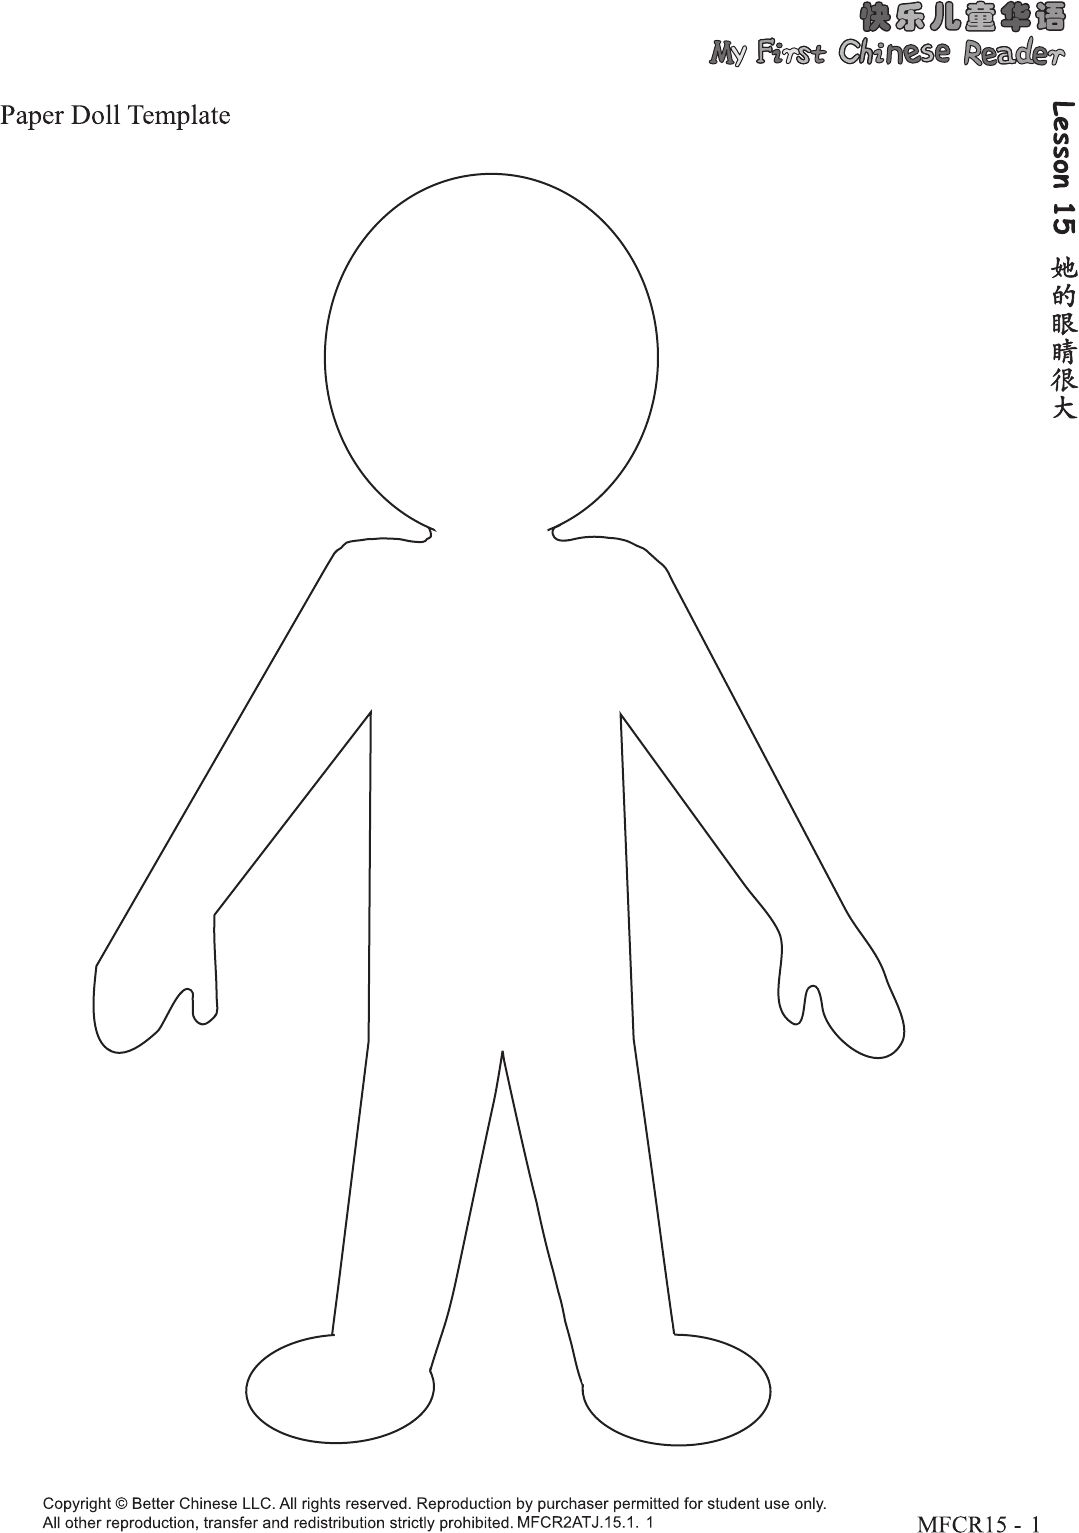 paper-doll-template-free-printable-printable-templates